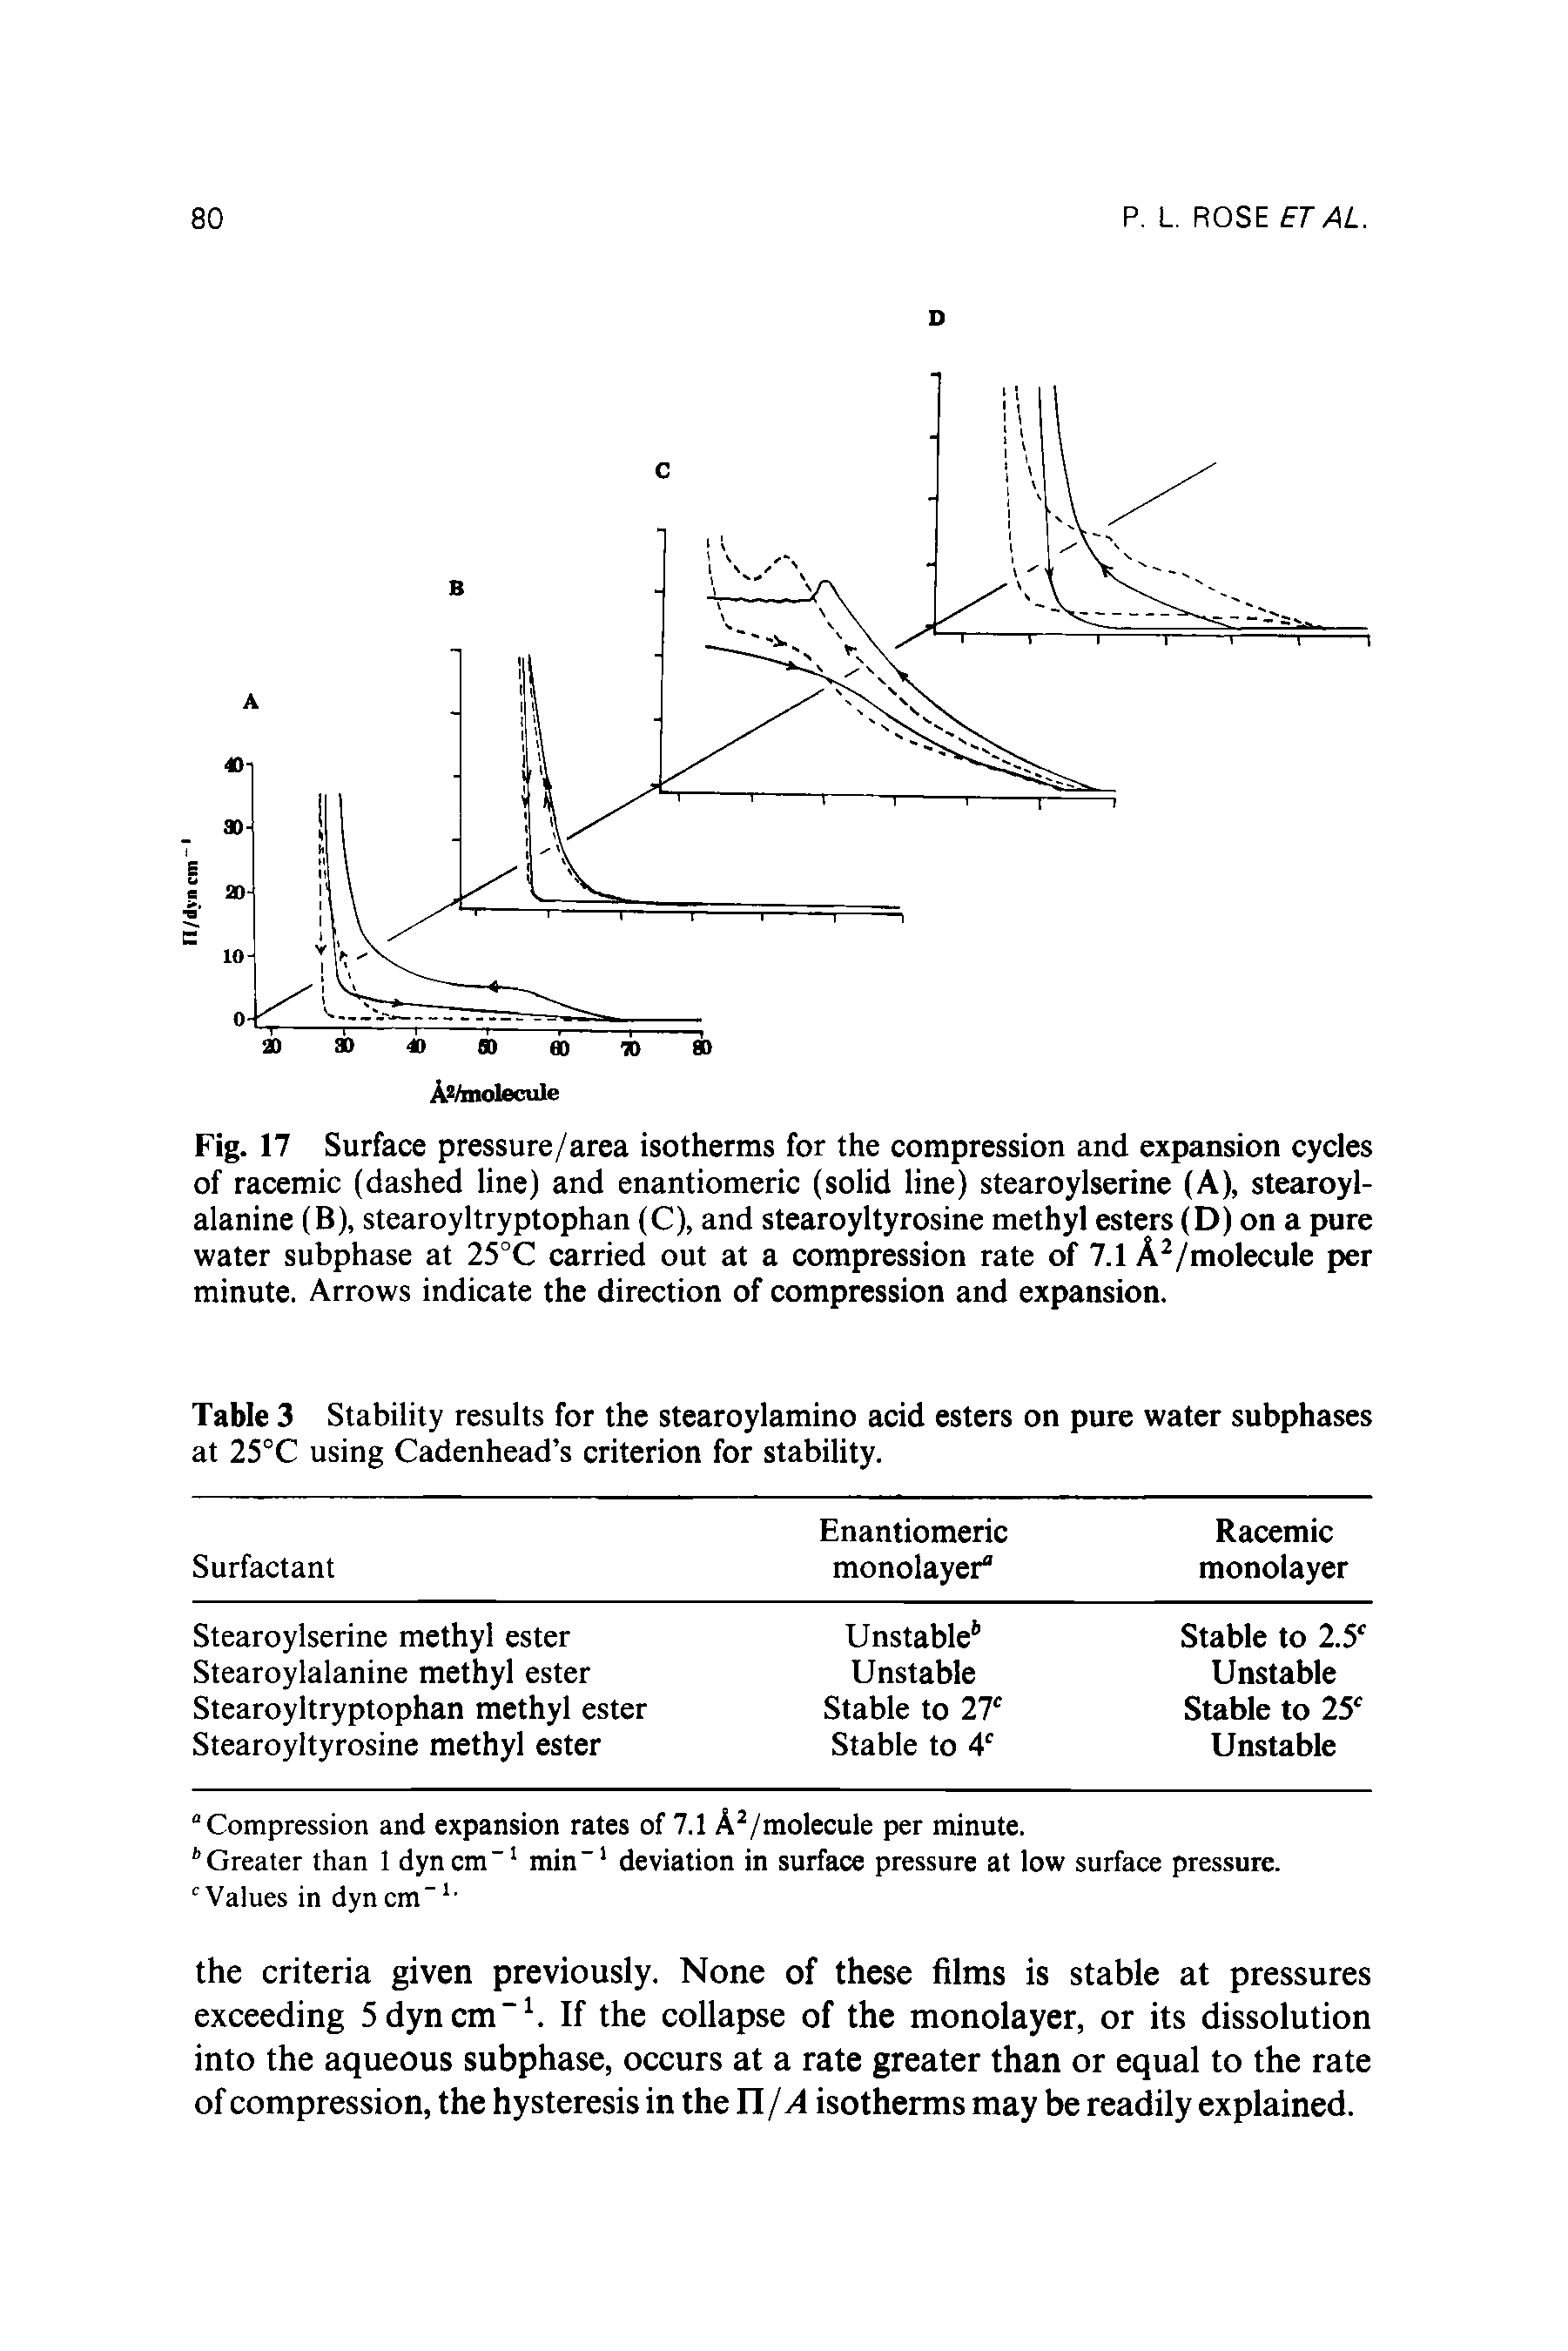 Table 3 Stability results for the stearoylamino acid esters on pure water subphases at 25°C using Cadenhead s criterion for stability.